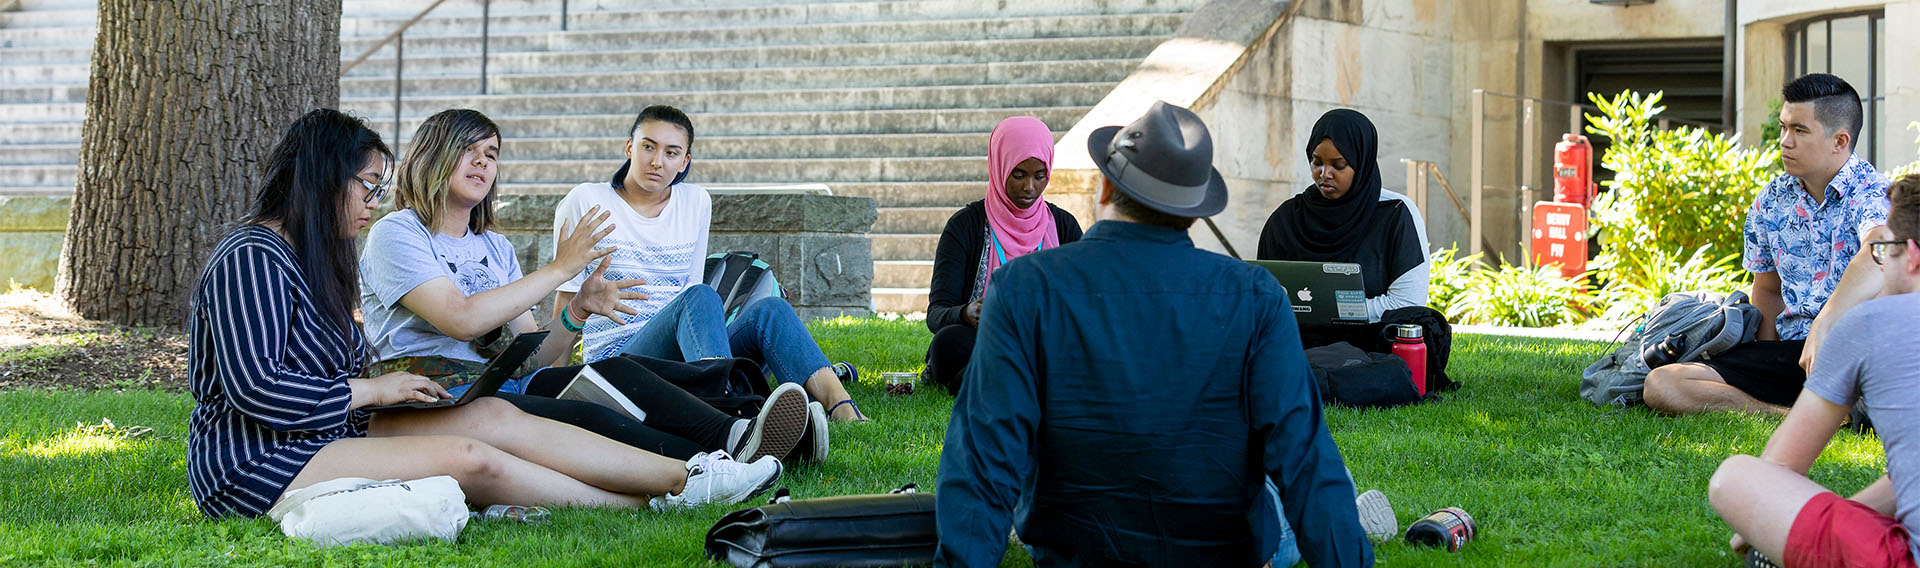 Students sitting outside on grass